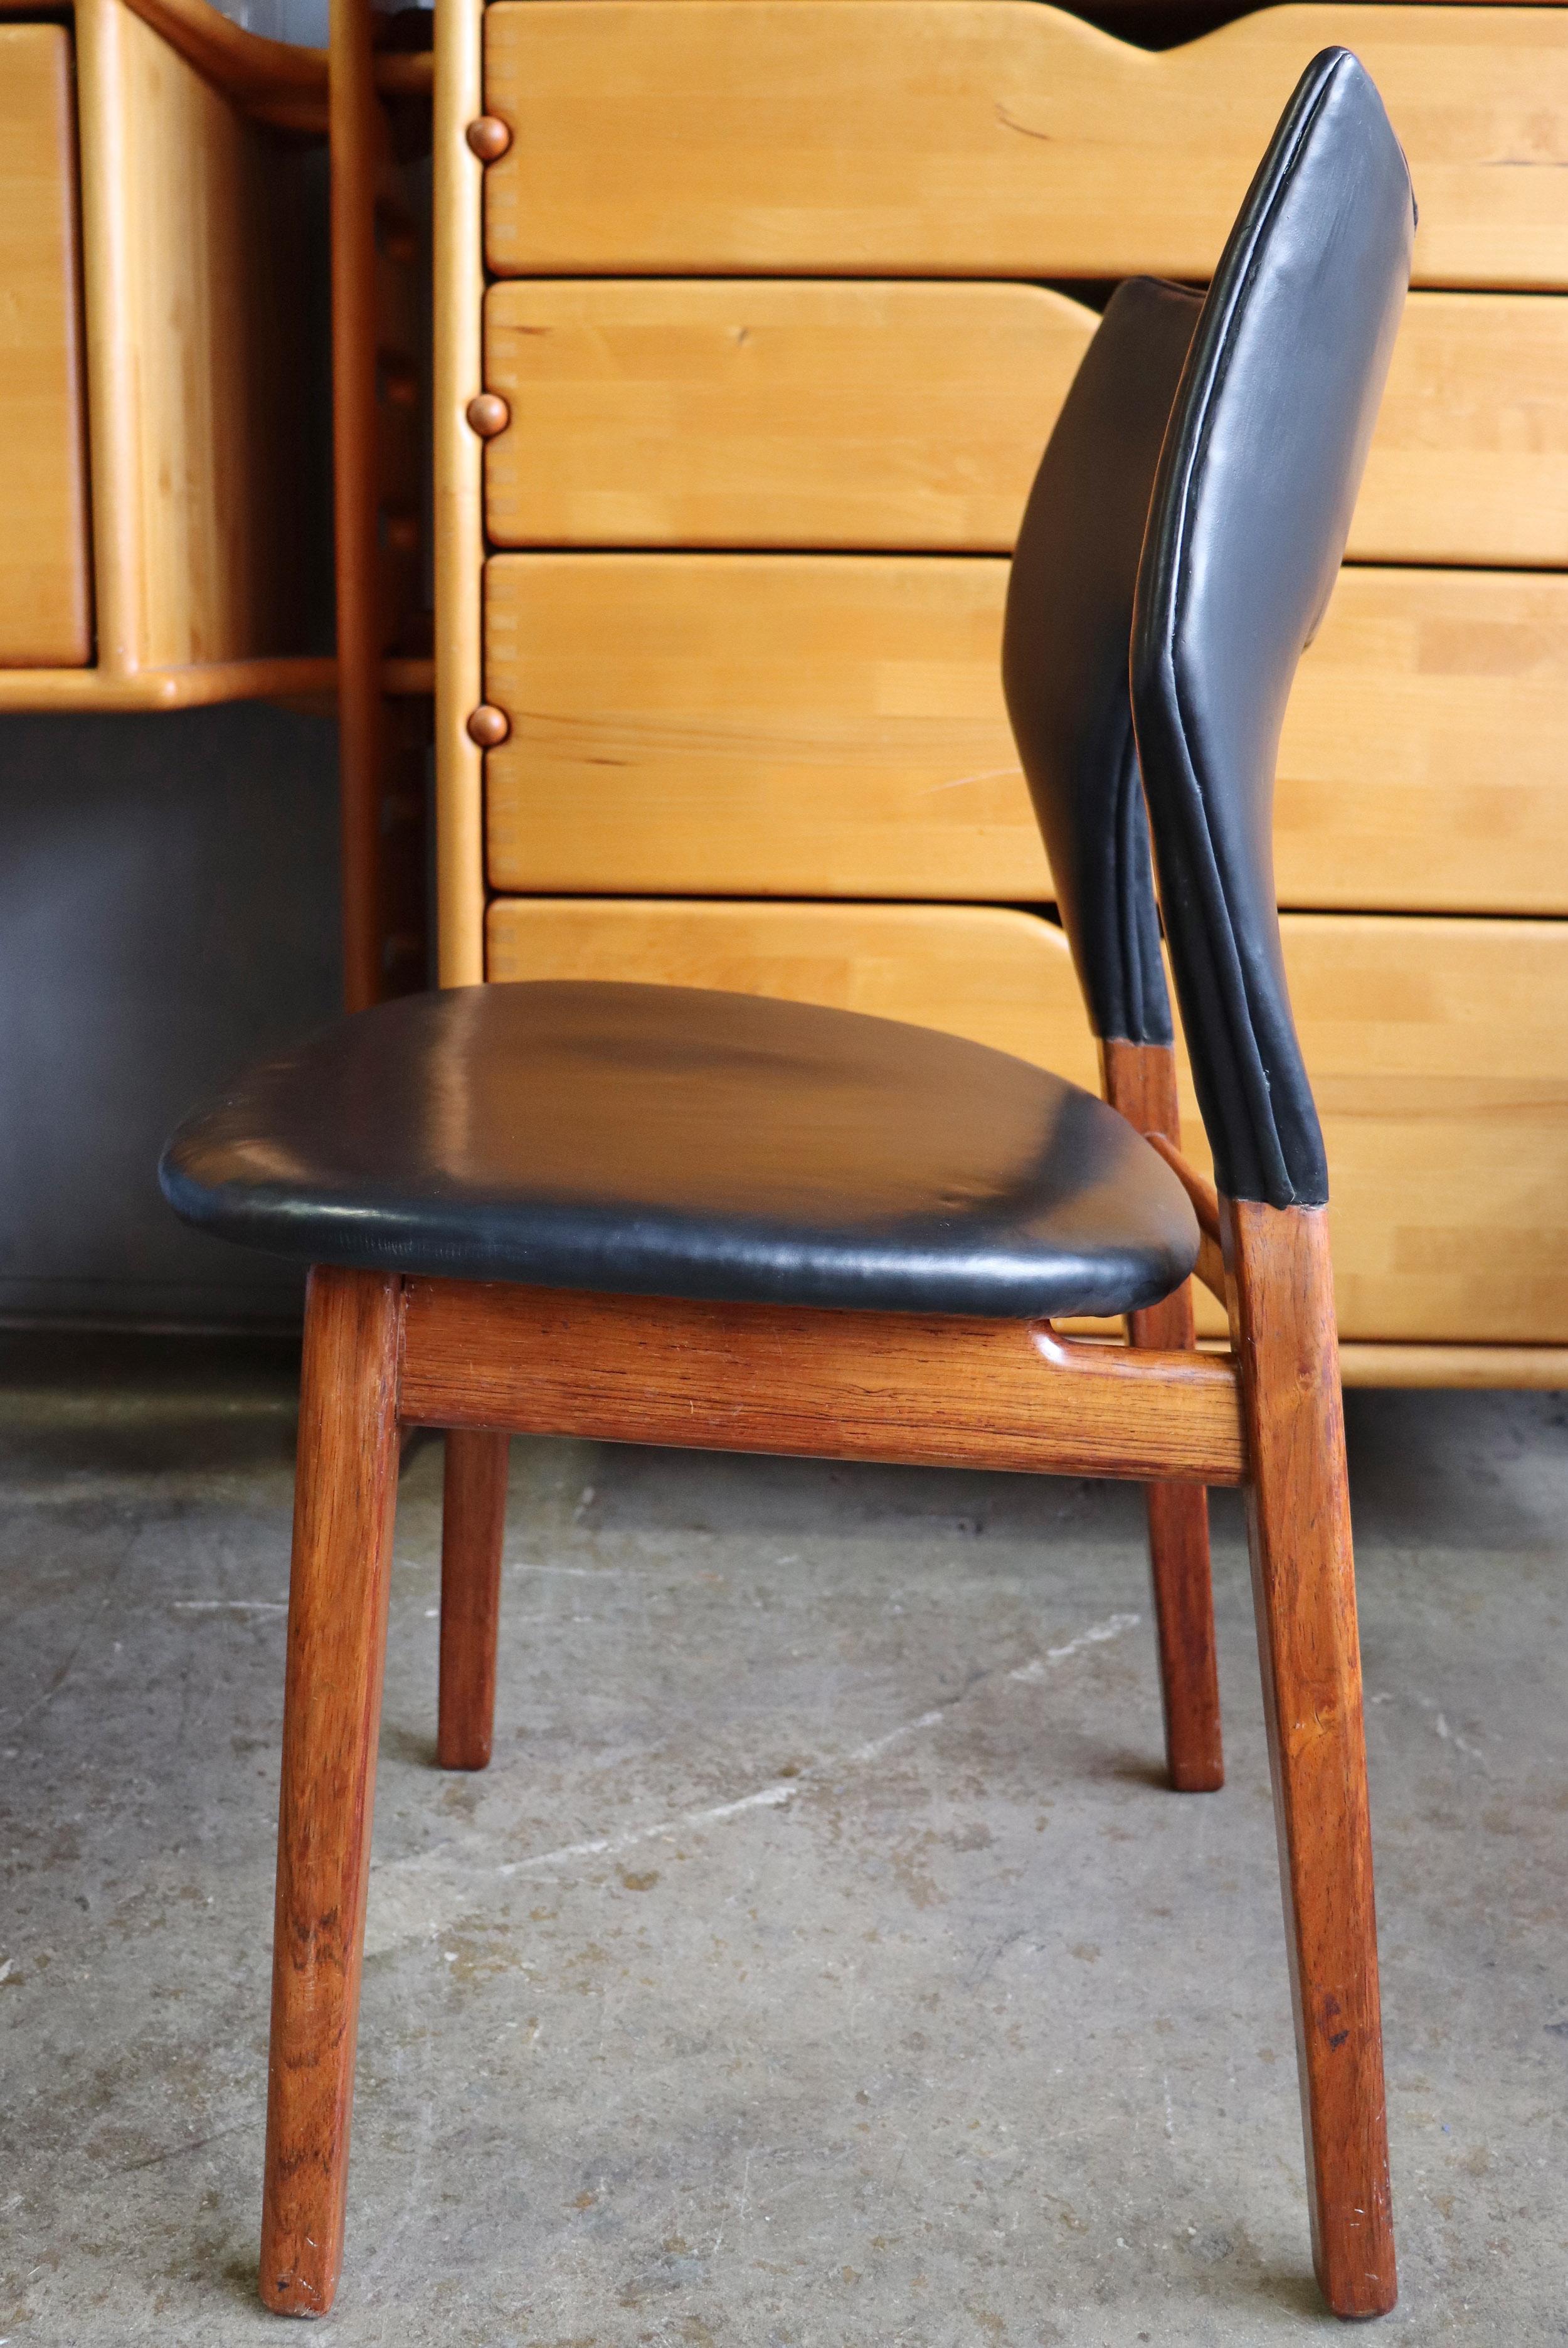 Mid-Century Modern Tove & Edvard Kindt-Larsen Rosewood Chair for Thorald Madsens